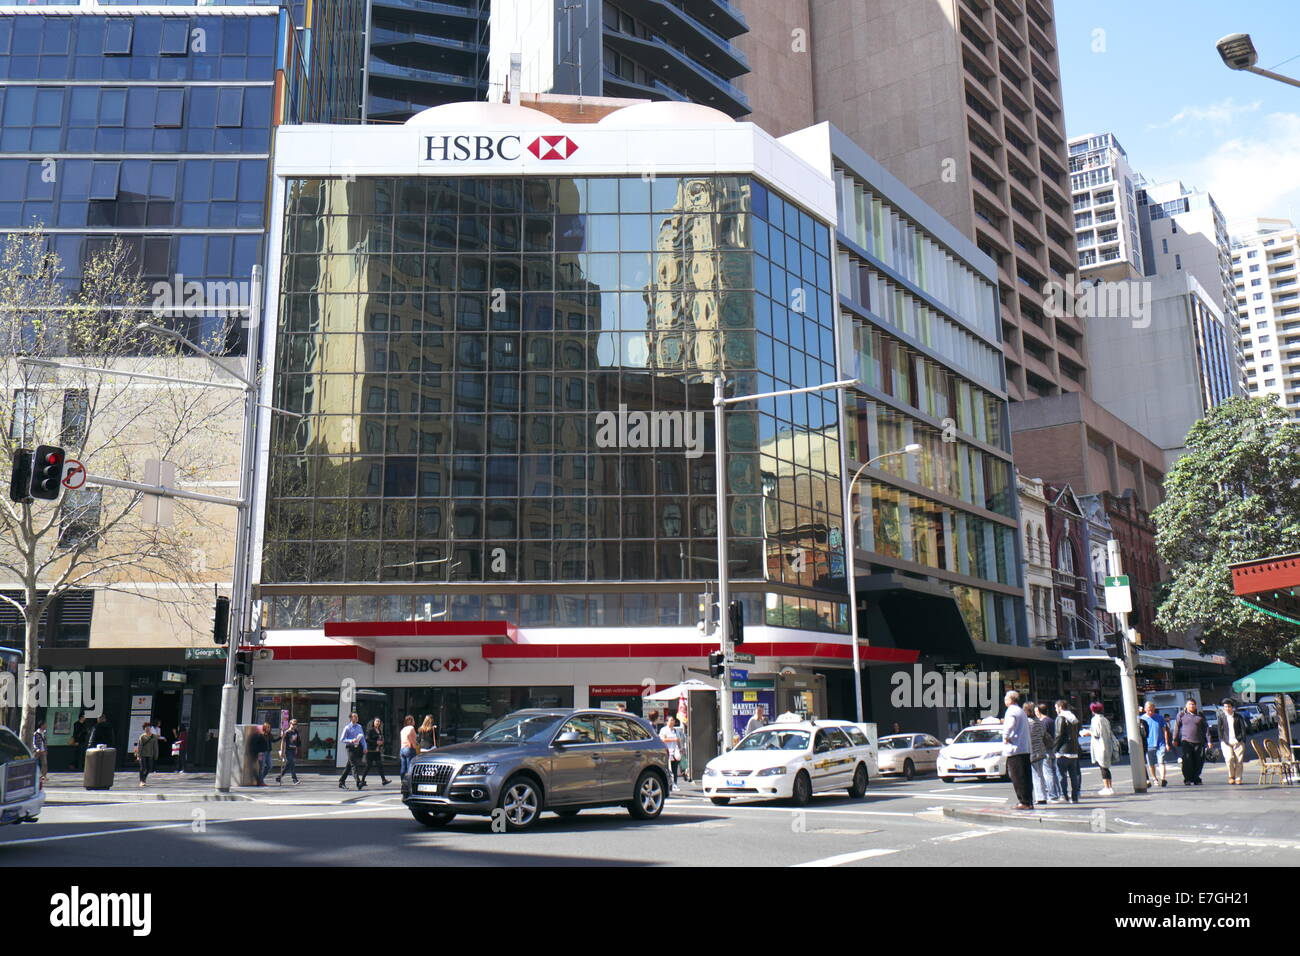 HSBC bank branch on southern end of George street in Sydney central business district,australia Stock Photo